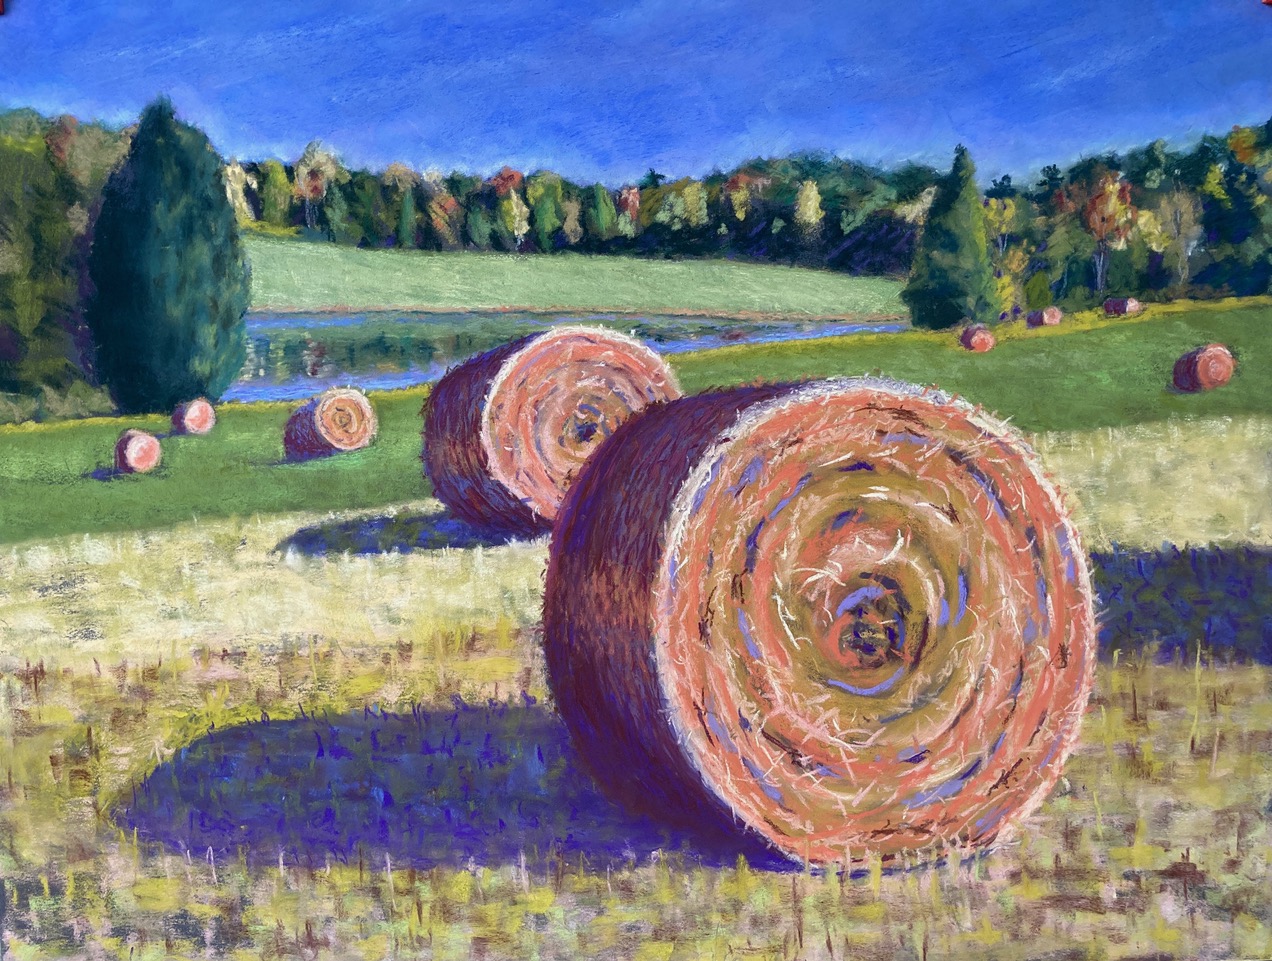 Hay Bales by Pond by A. Hunter Taylor,  pastel, 19.5 x 25.5 unframed at Craven Allen Gallery   1100